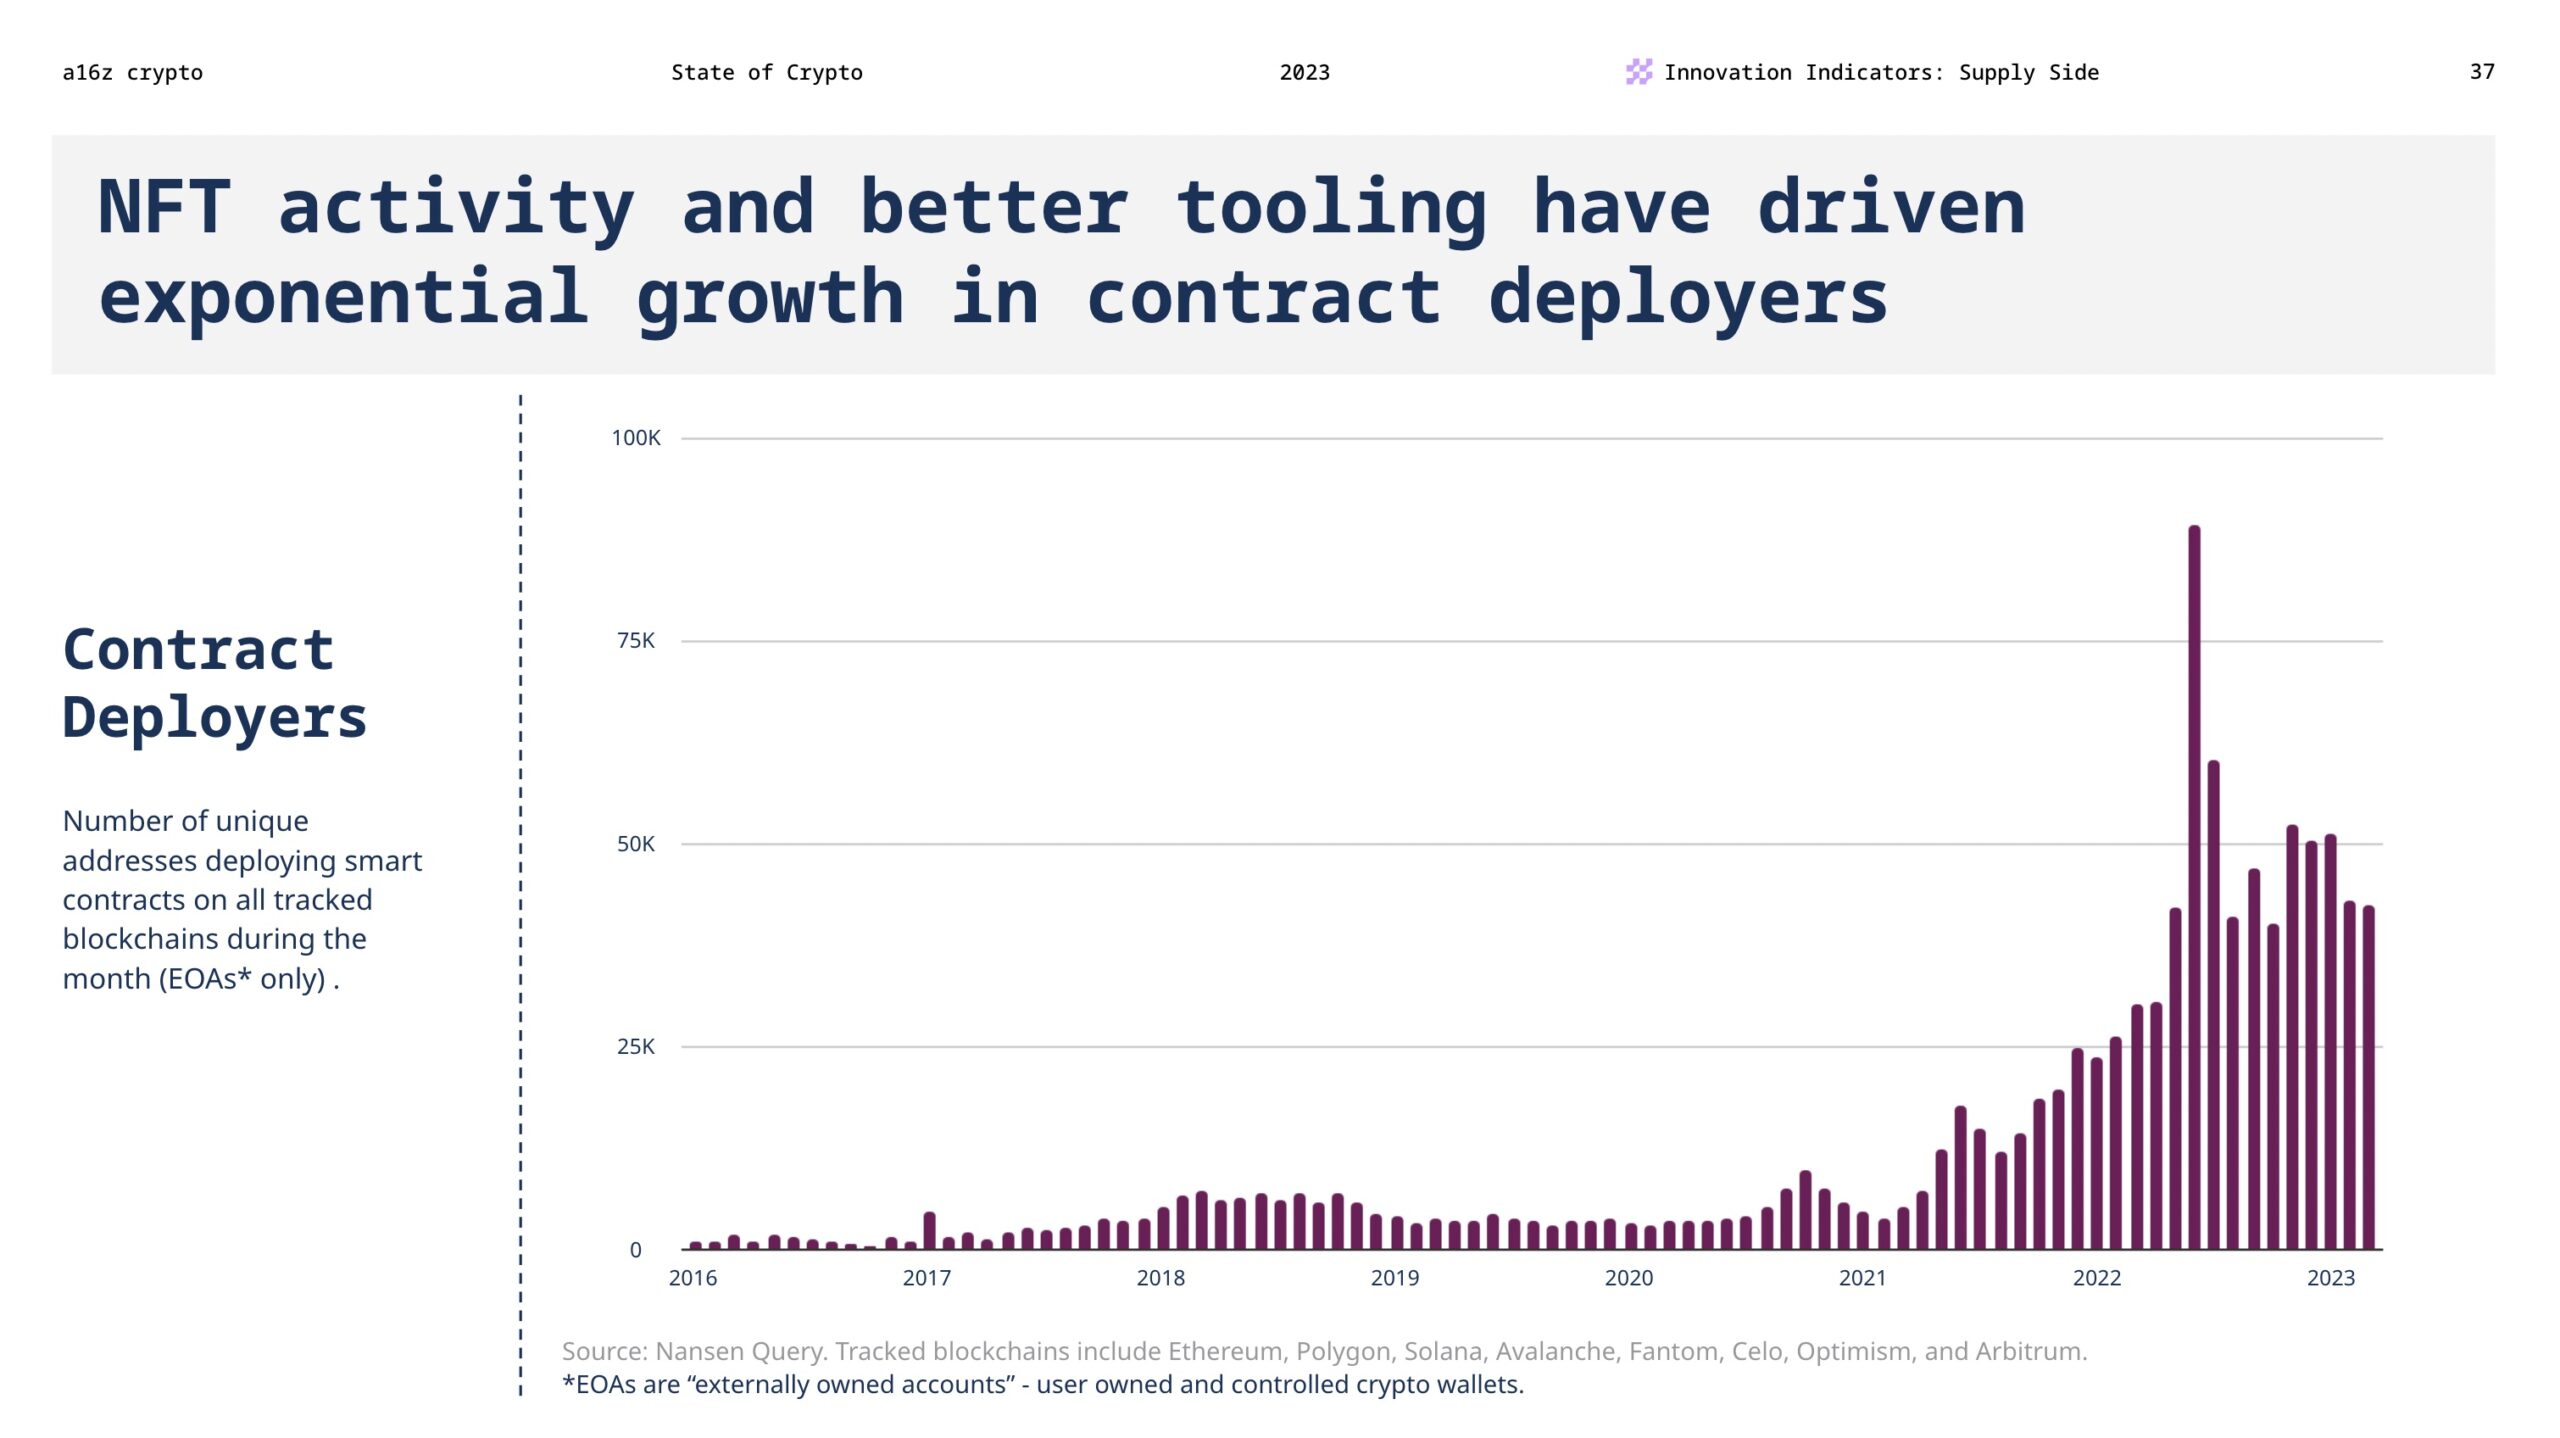 NFT activity and better tooling have driven exponential growth in contract developers